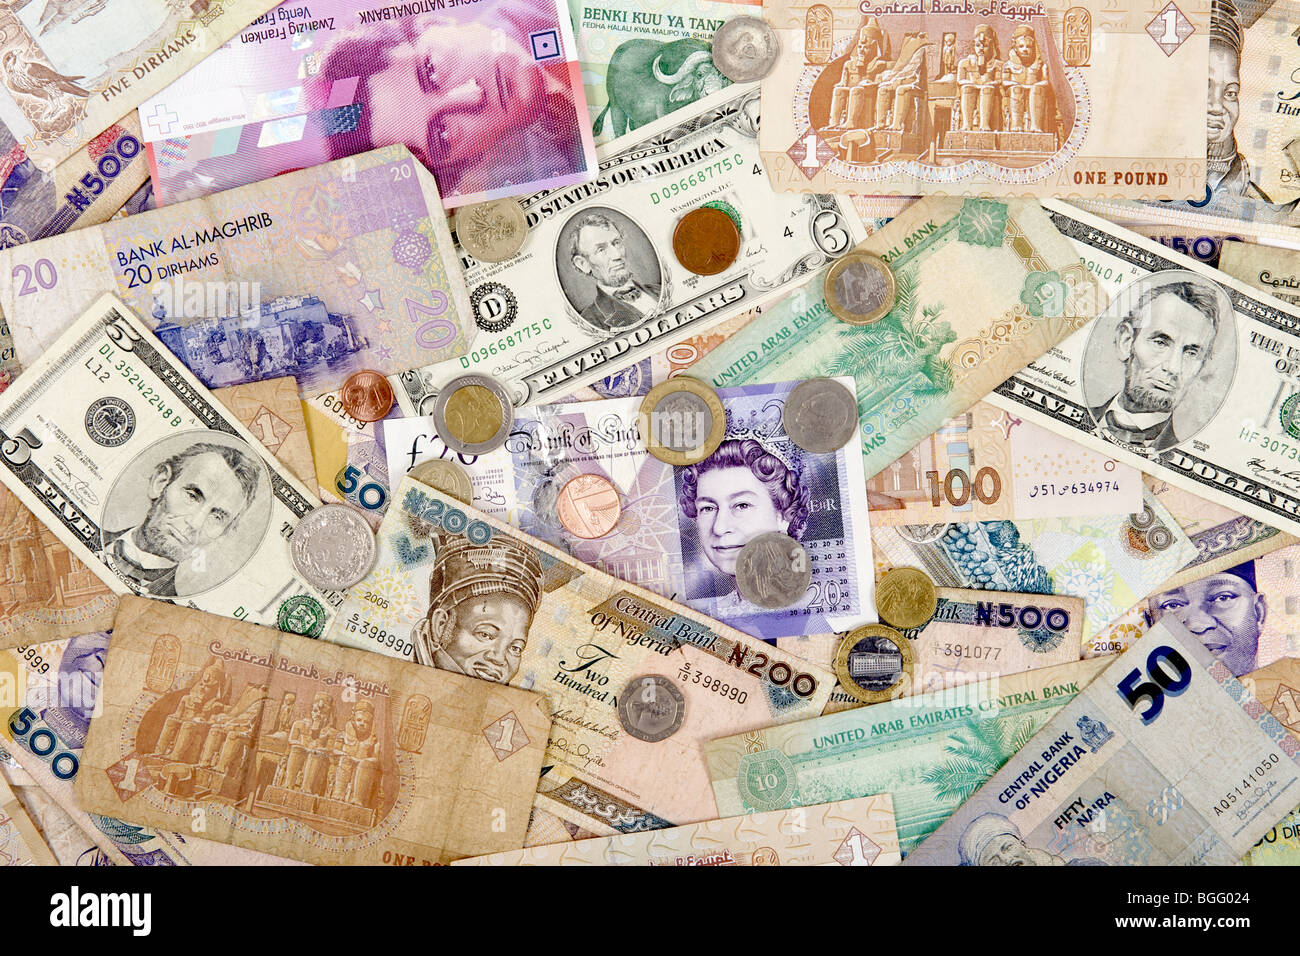 International Currencies Money Lots Of It Coins And Banknotes From